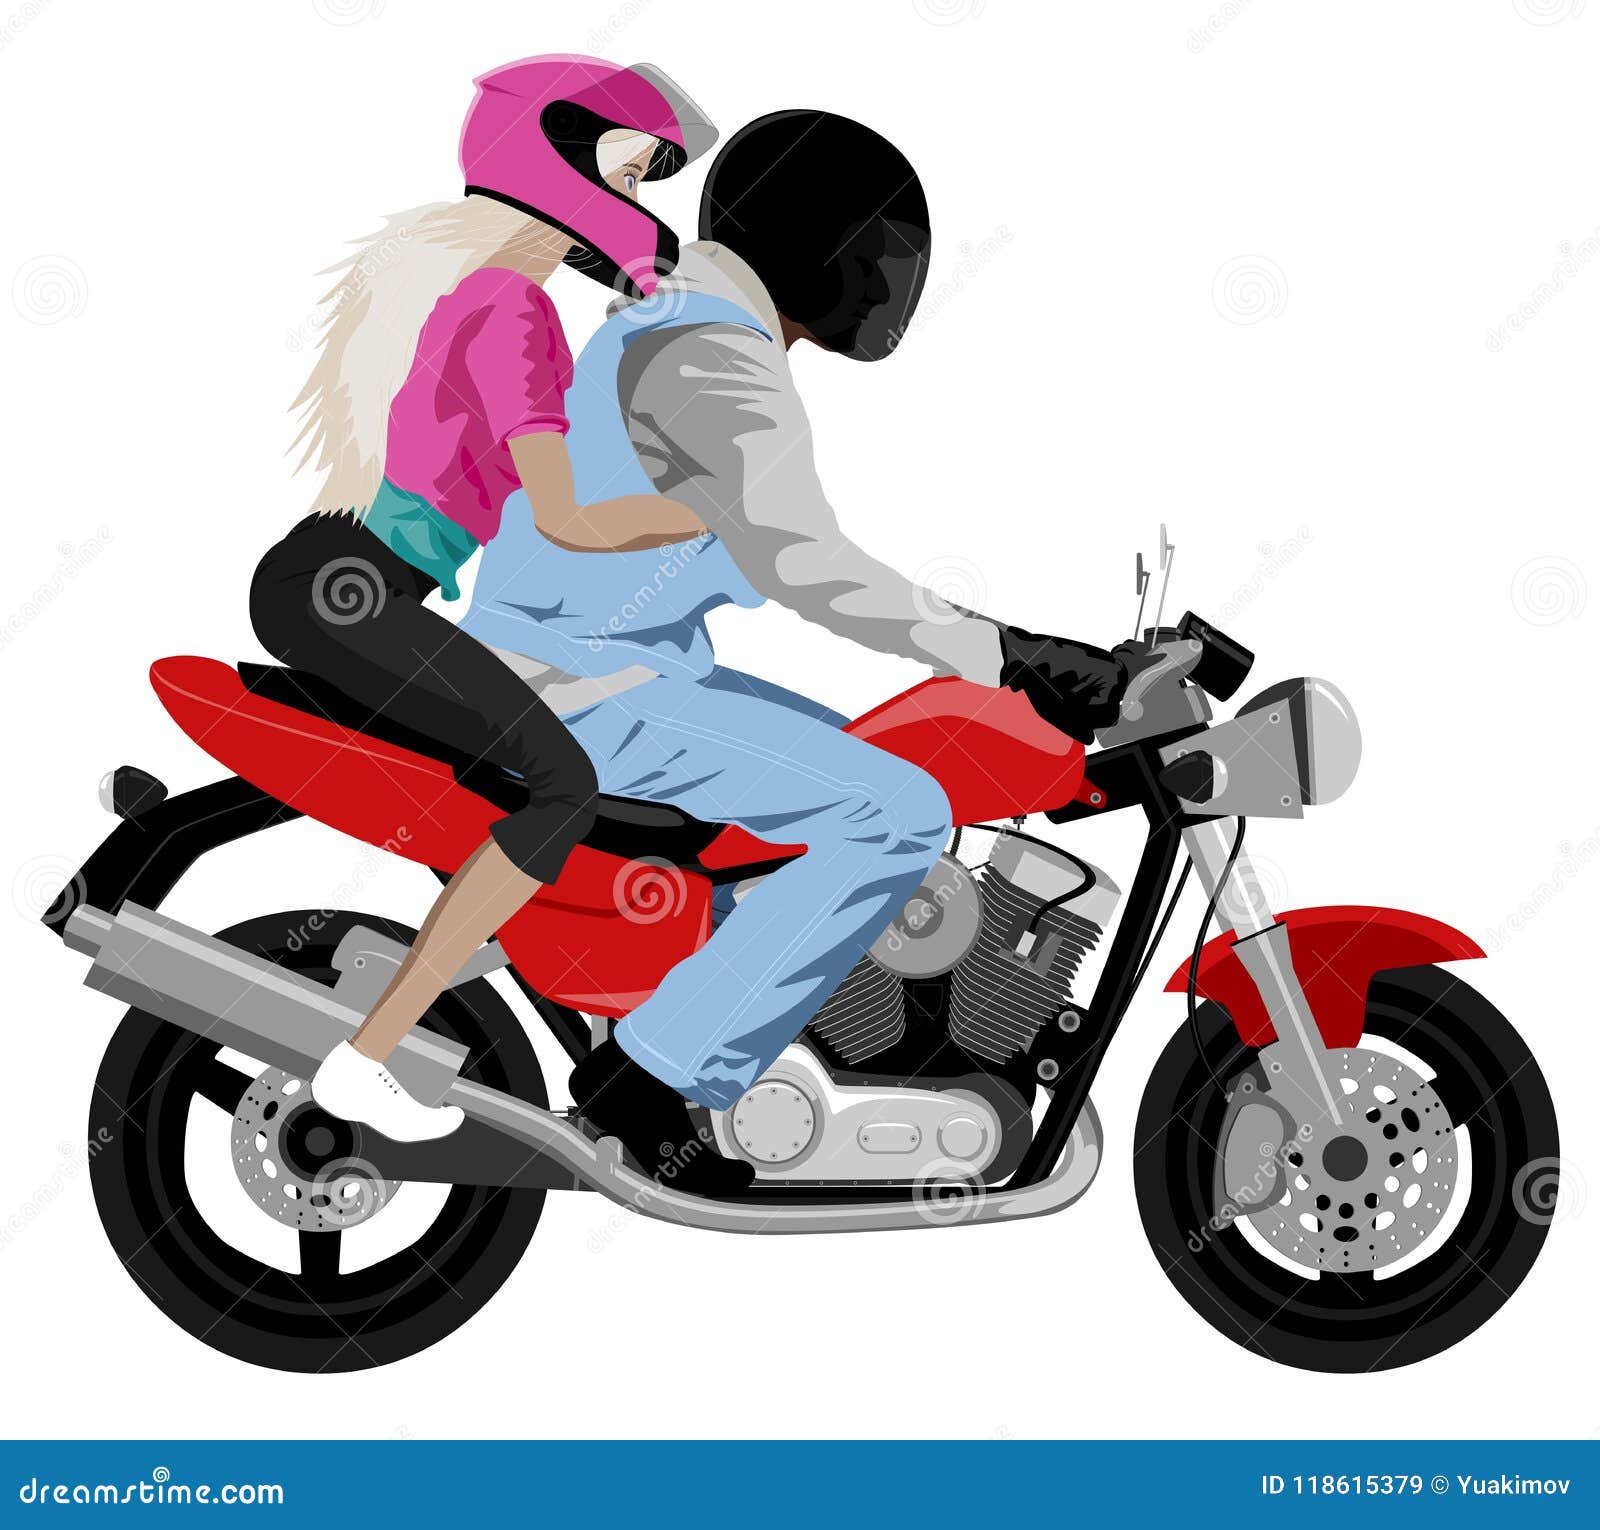 motorcycle with rider and beautiful girl passenger wearing helmet side view  on white  